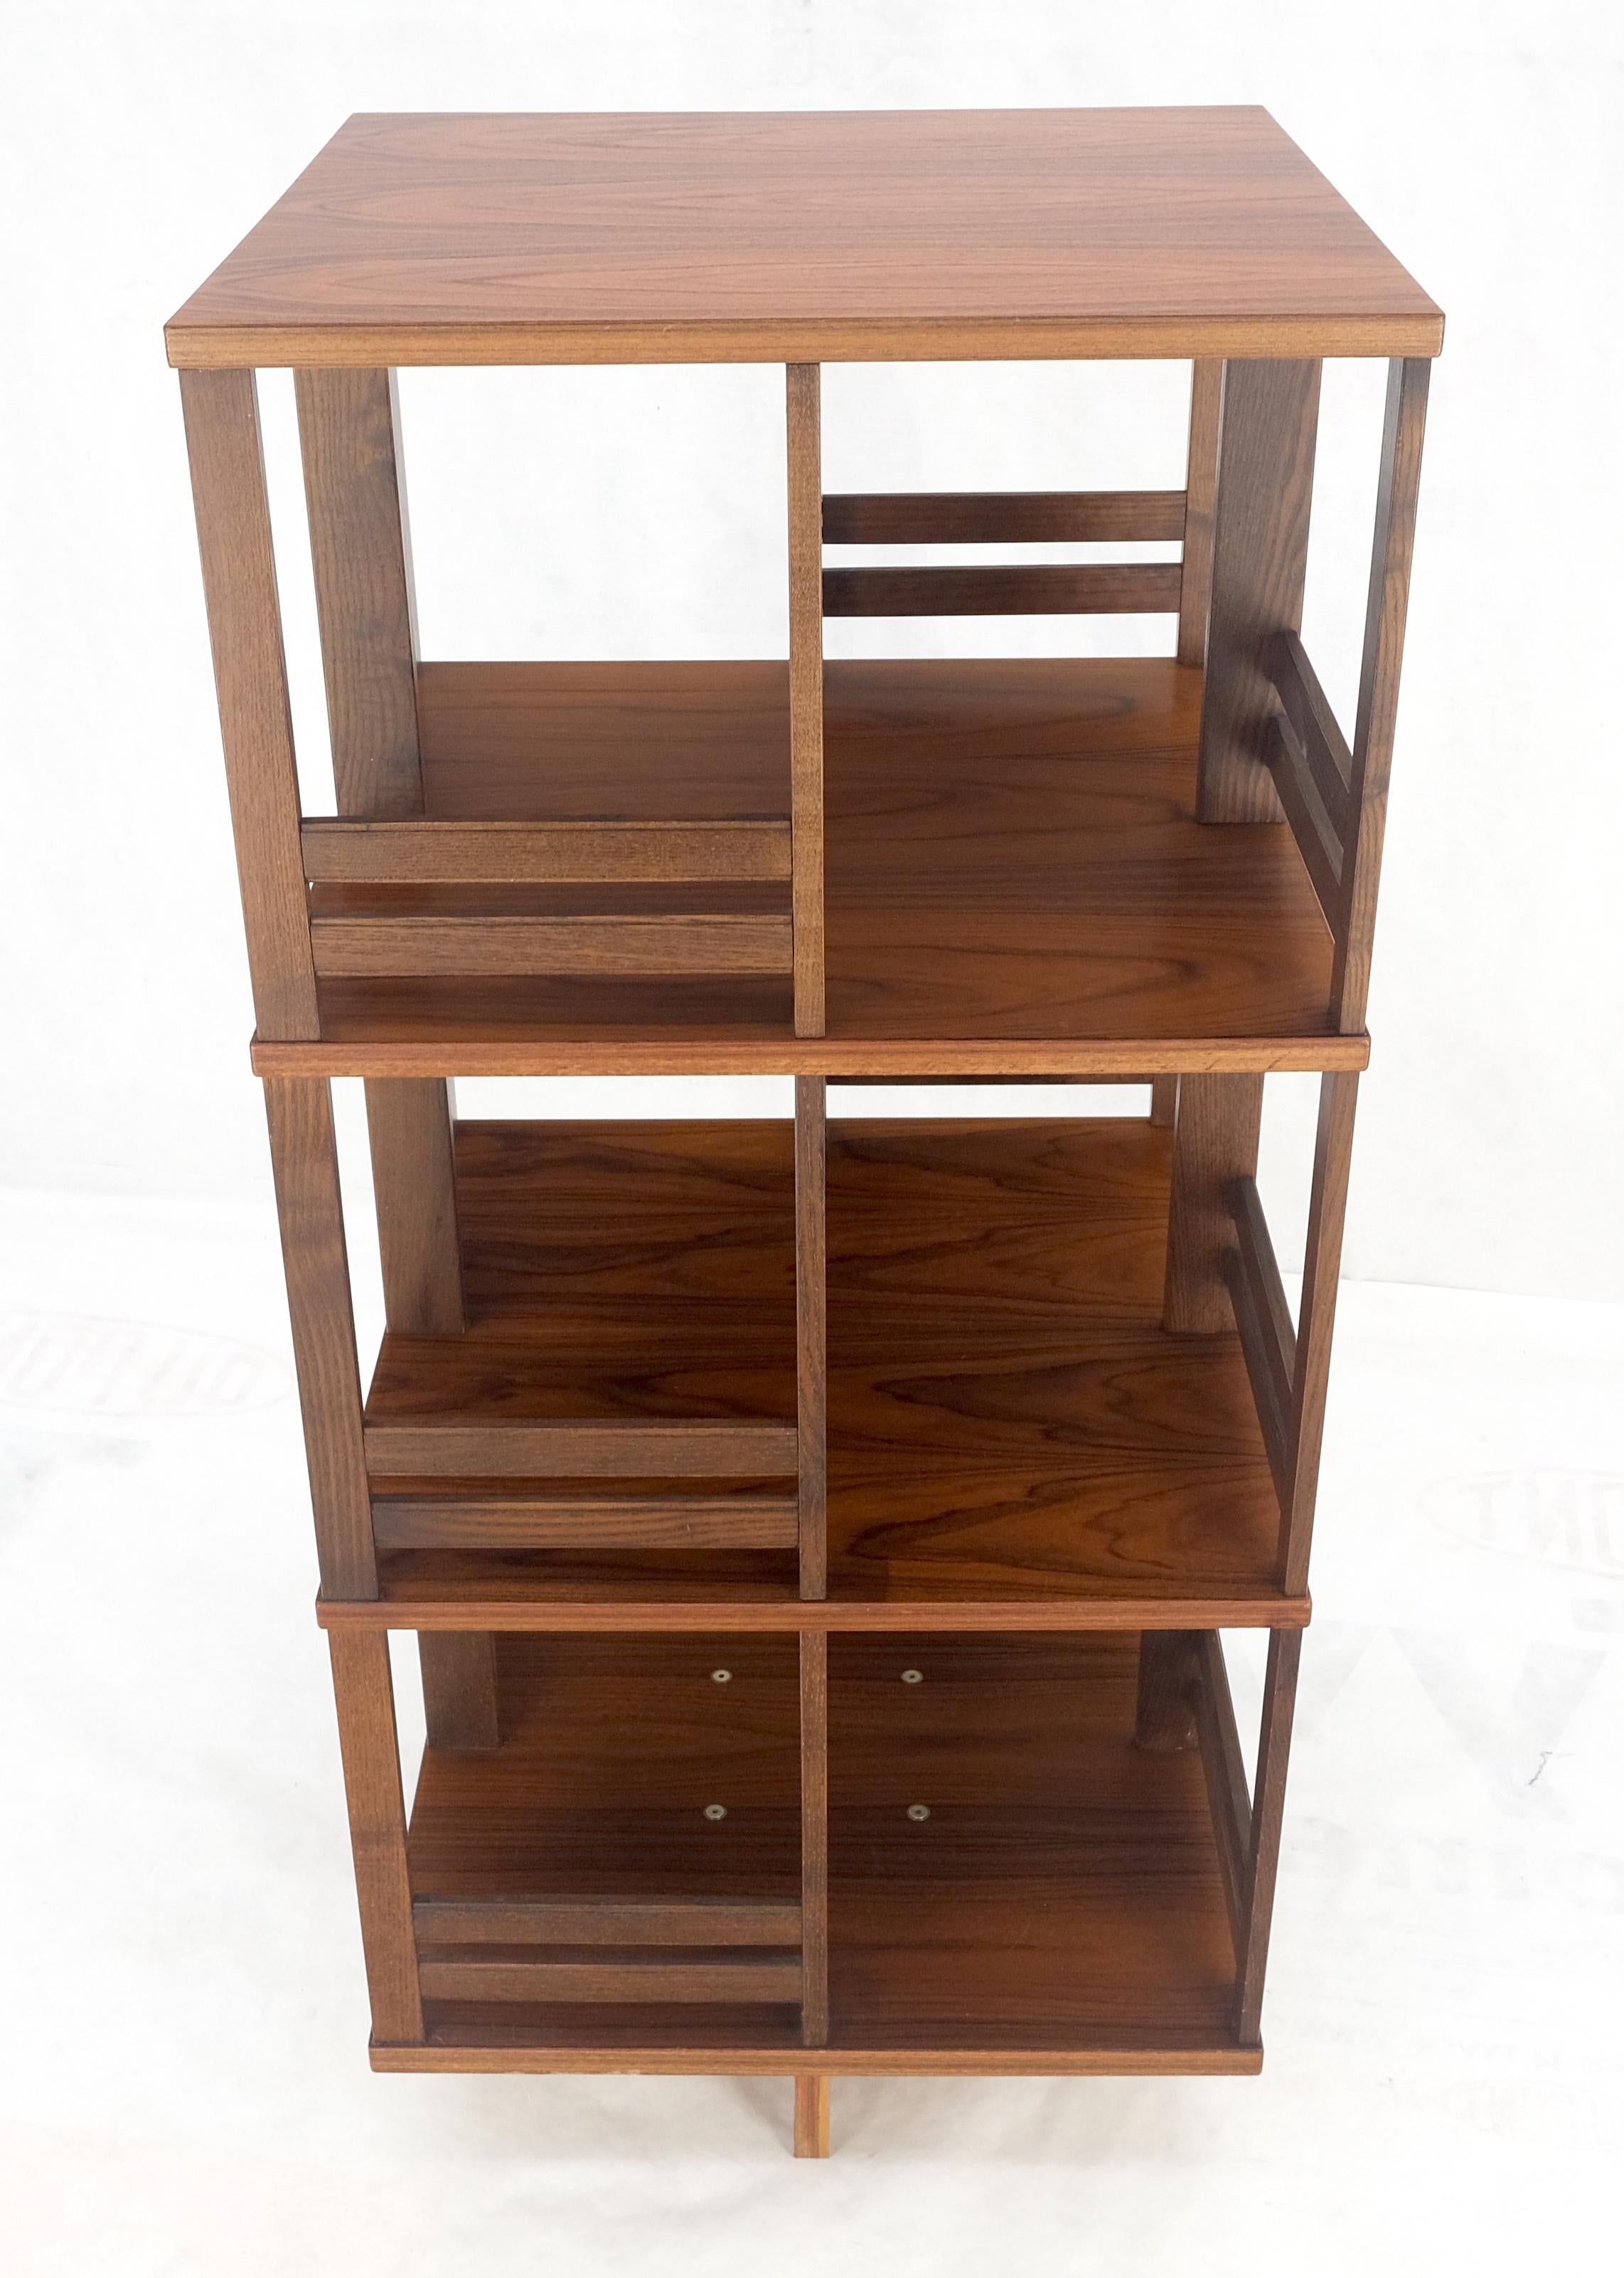 Lacquered Danish Mid Century Modern Rosewood Square Revolving Bookcase Shelf MINT! For Sale